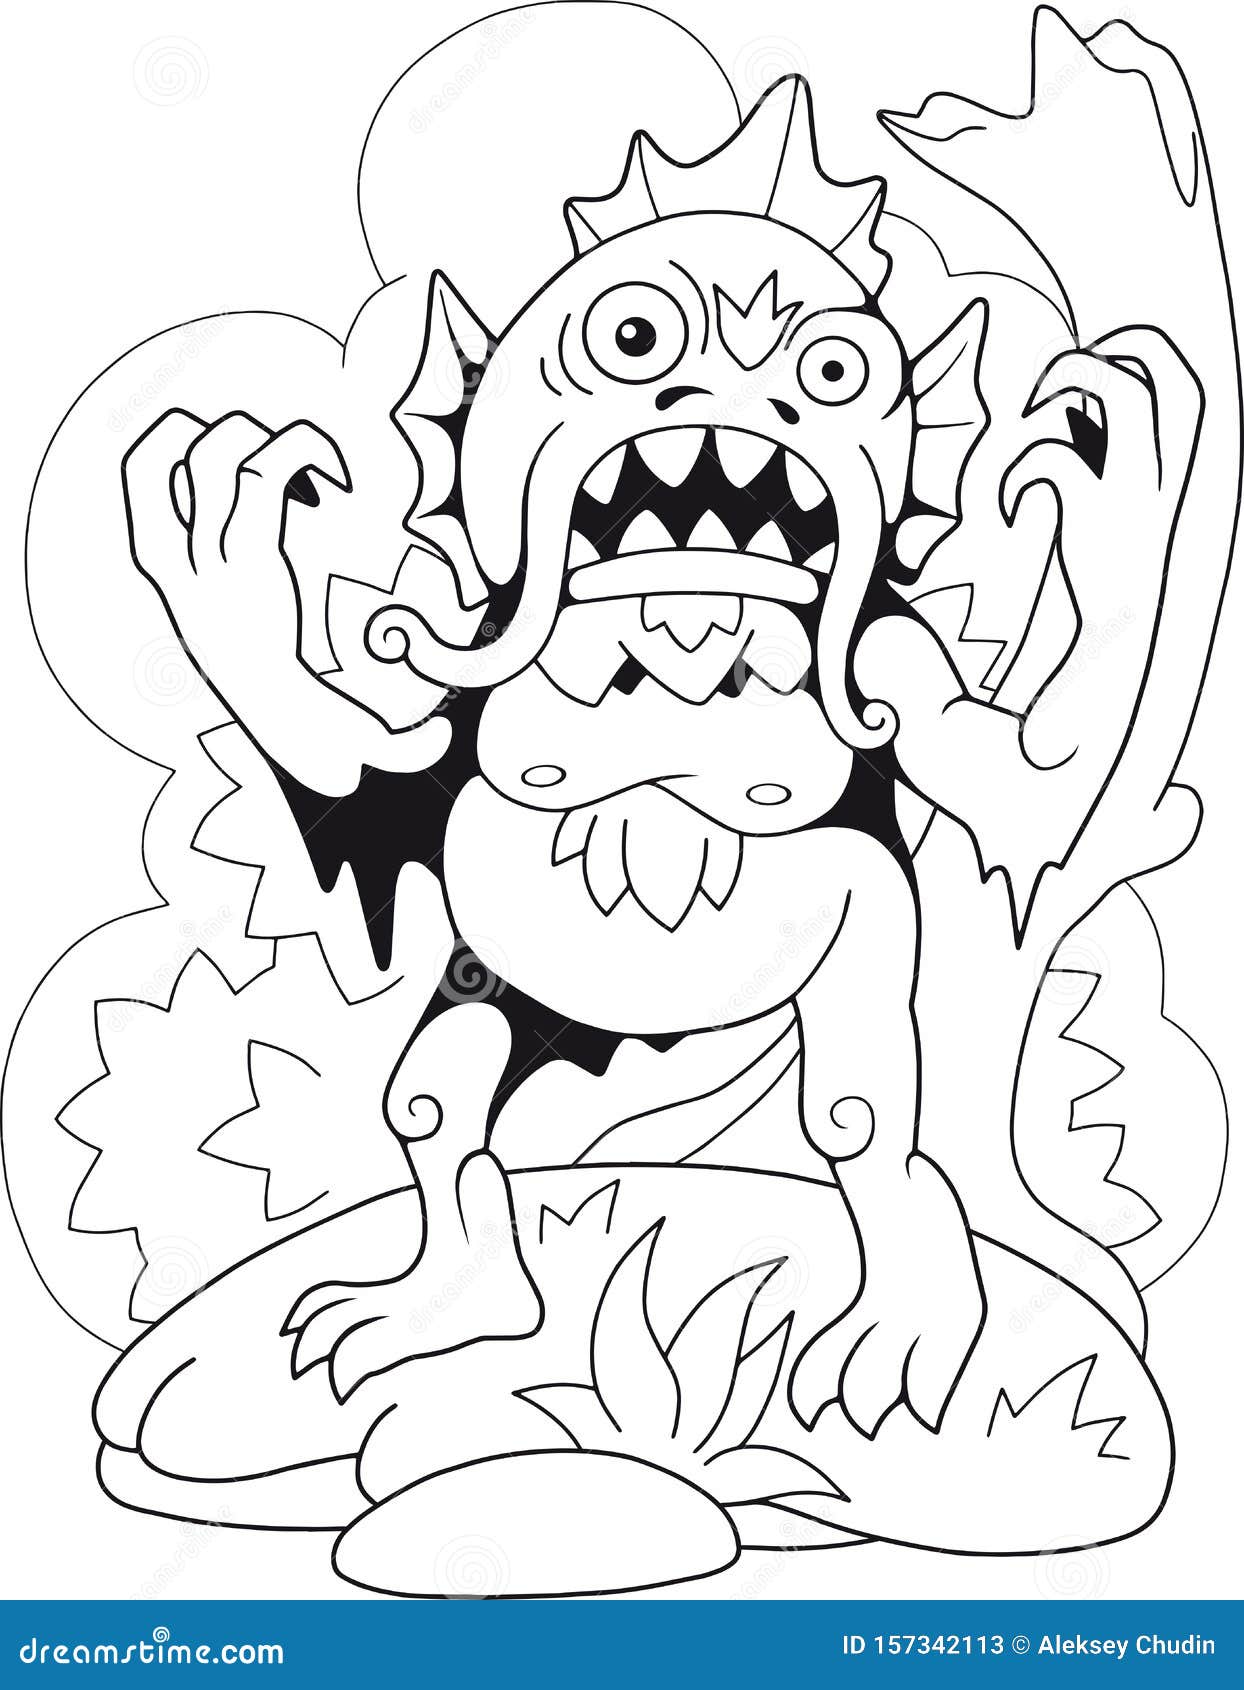 Scary Swamp Monster, Coloring Book, Funny Illustration Stock Vector ...